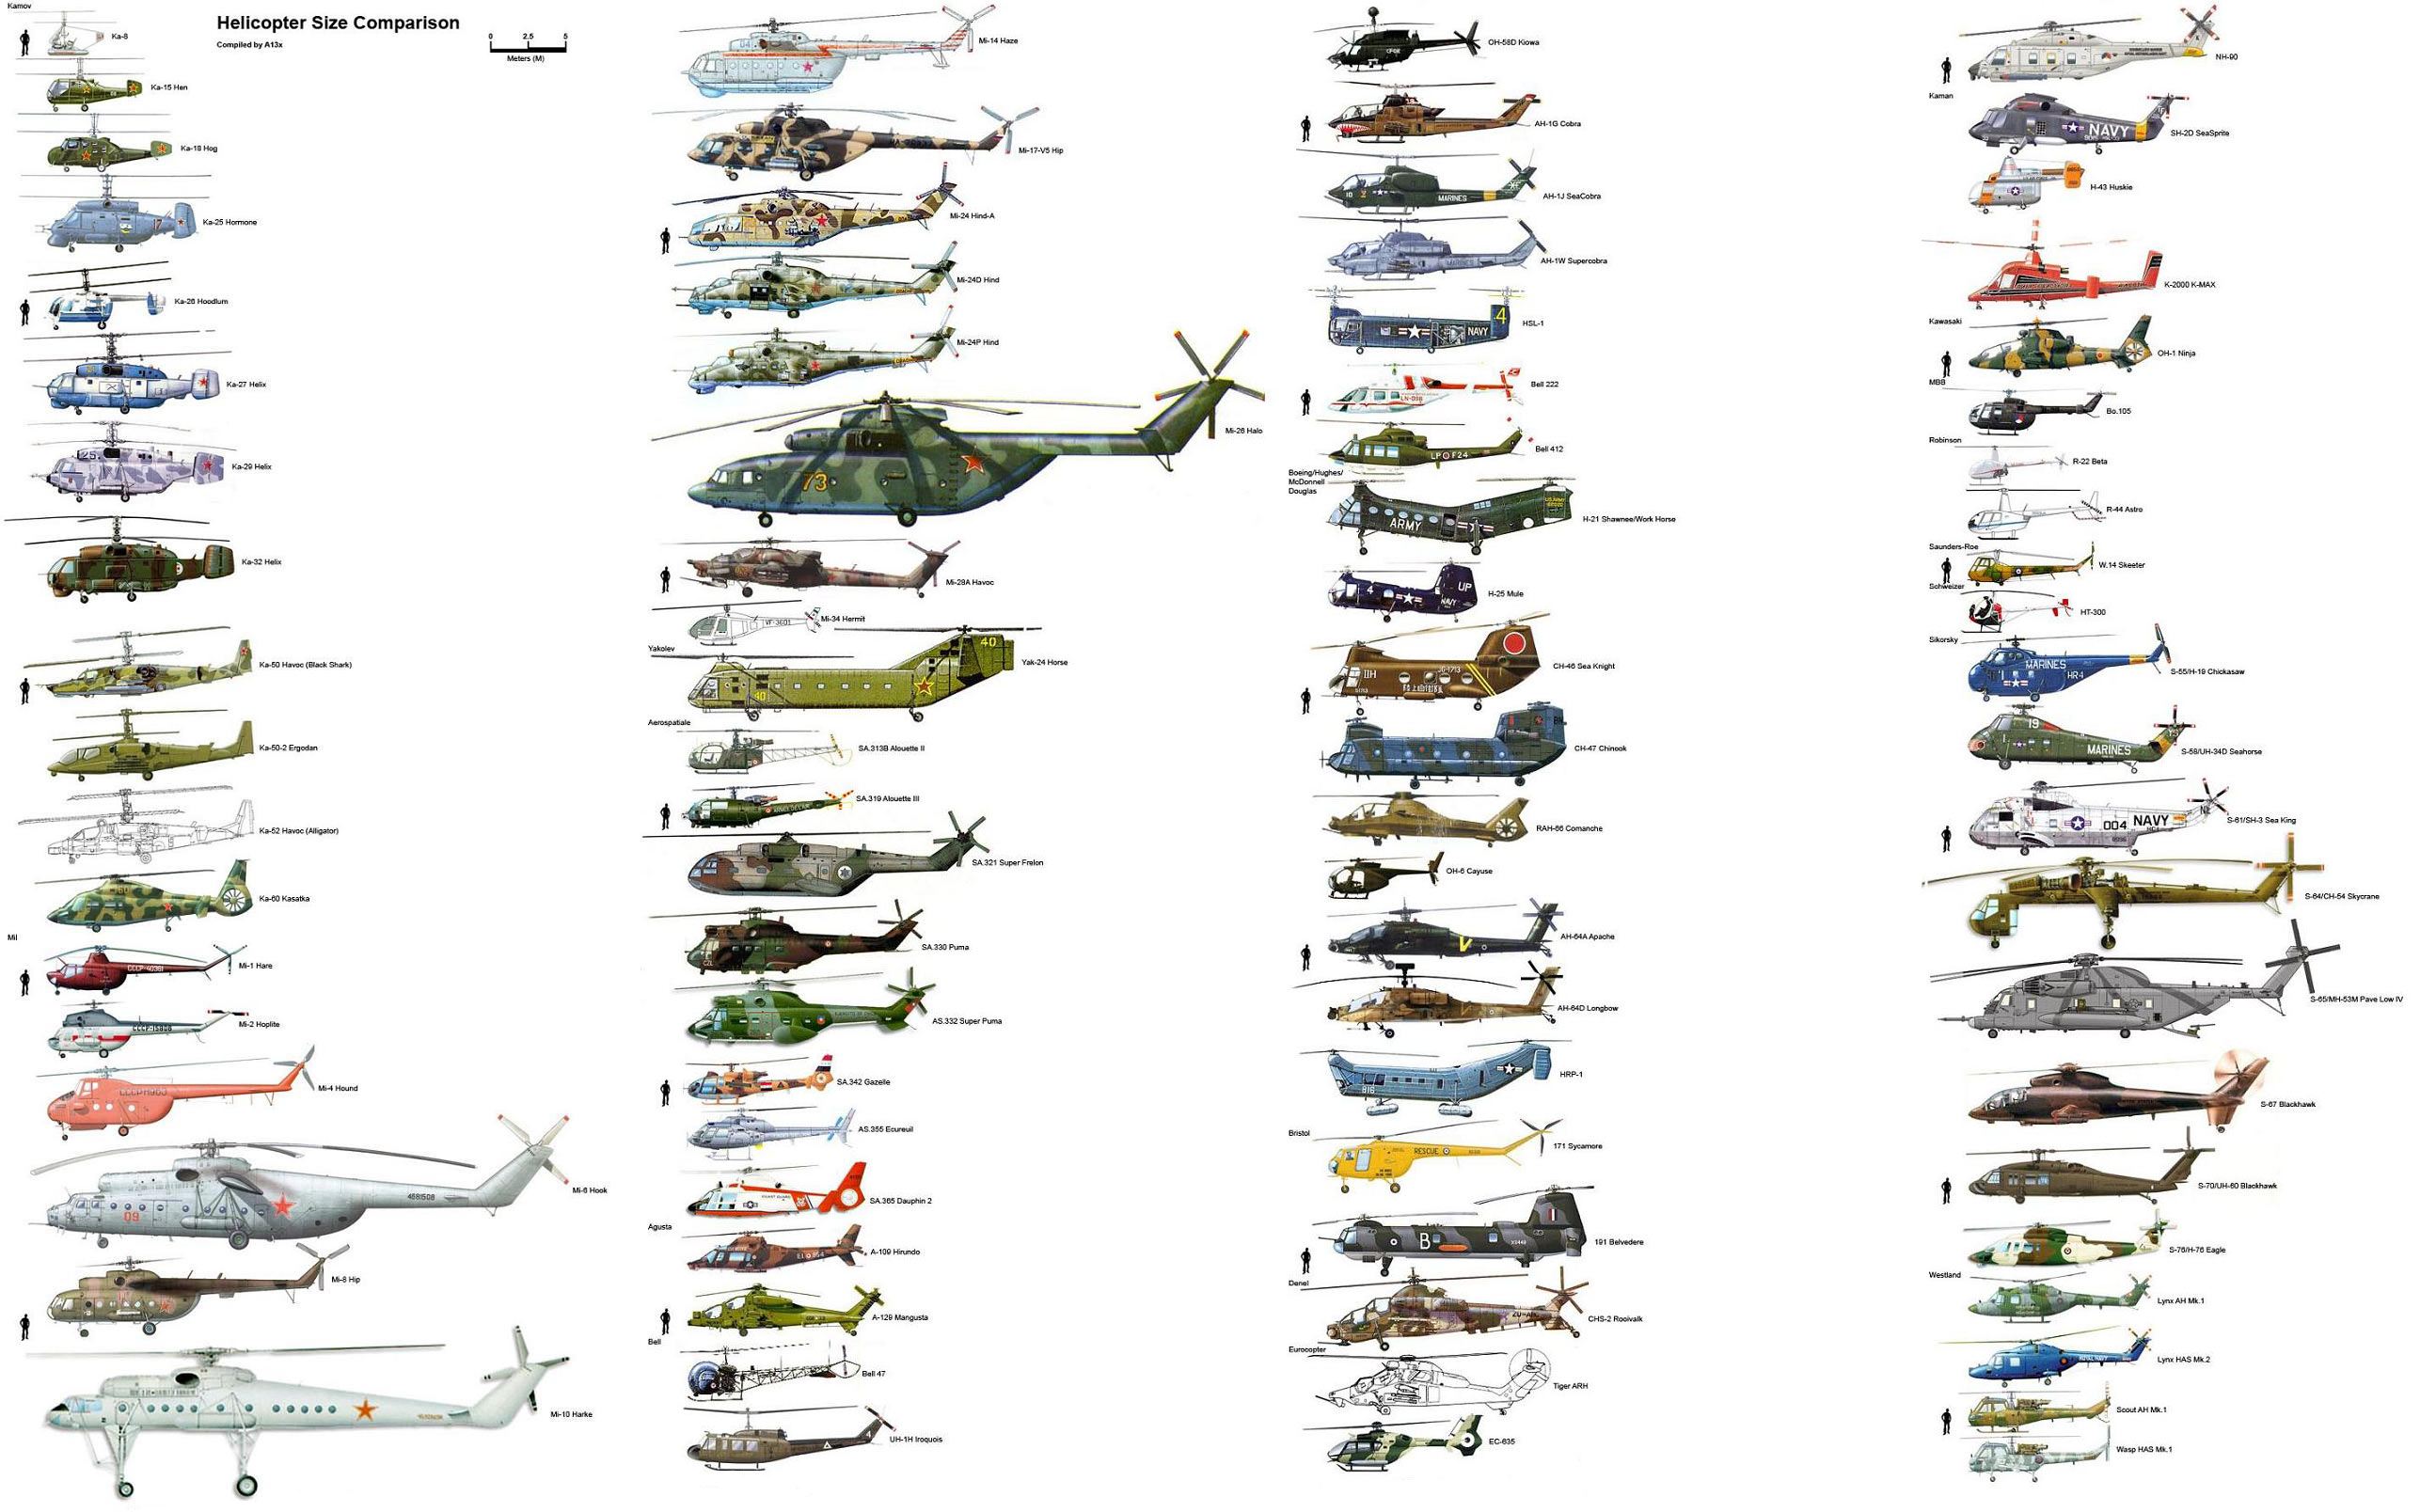 helicopter, military, aircraft, military helicopters